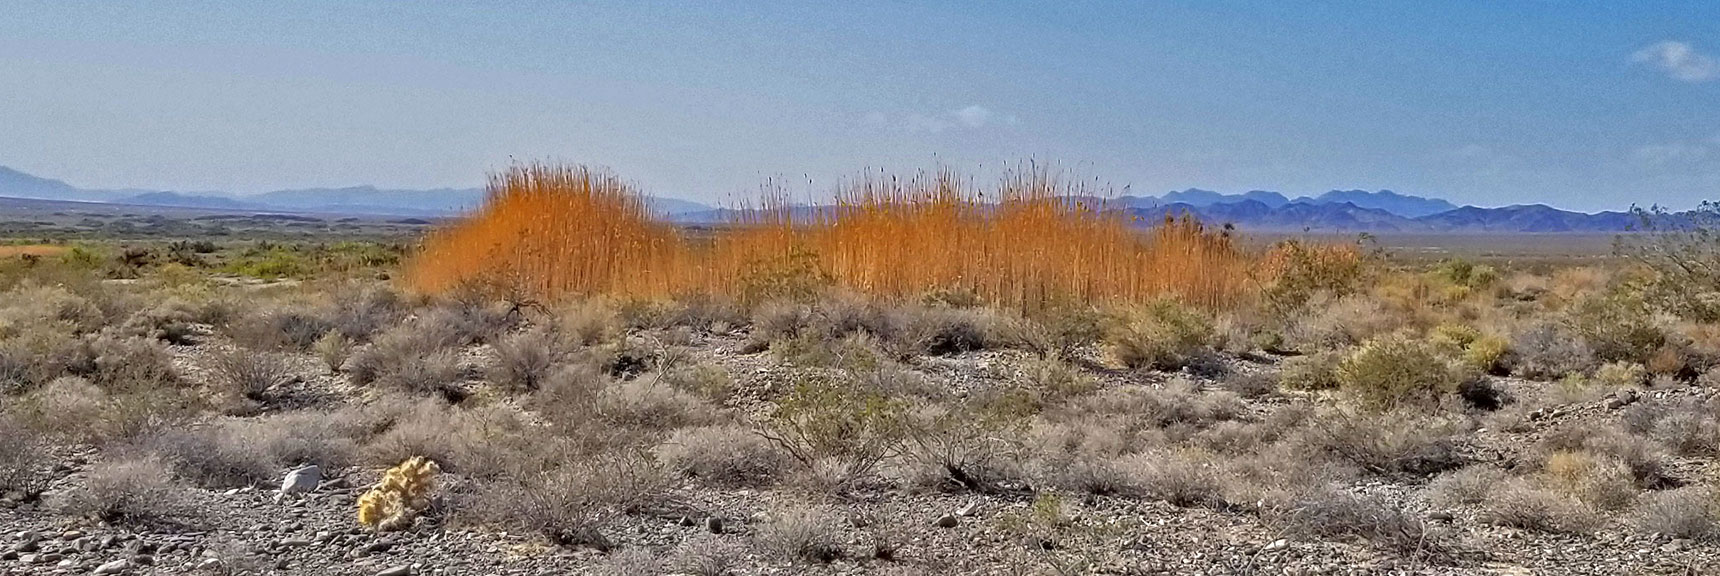 Tall Reeds Near Mormon Well Road Are a Sign of an Underground Spring in the Desert | Fossil Ridge End to End | Sheep Range | Desert National Wildlife Refuge, Nevada